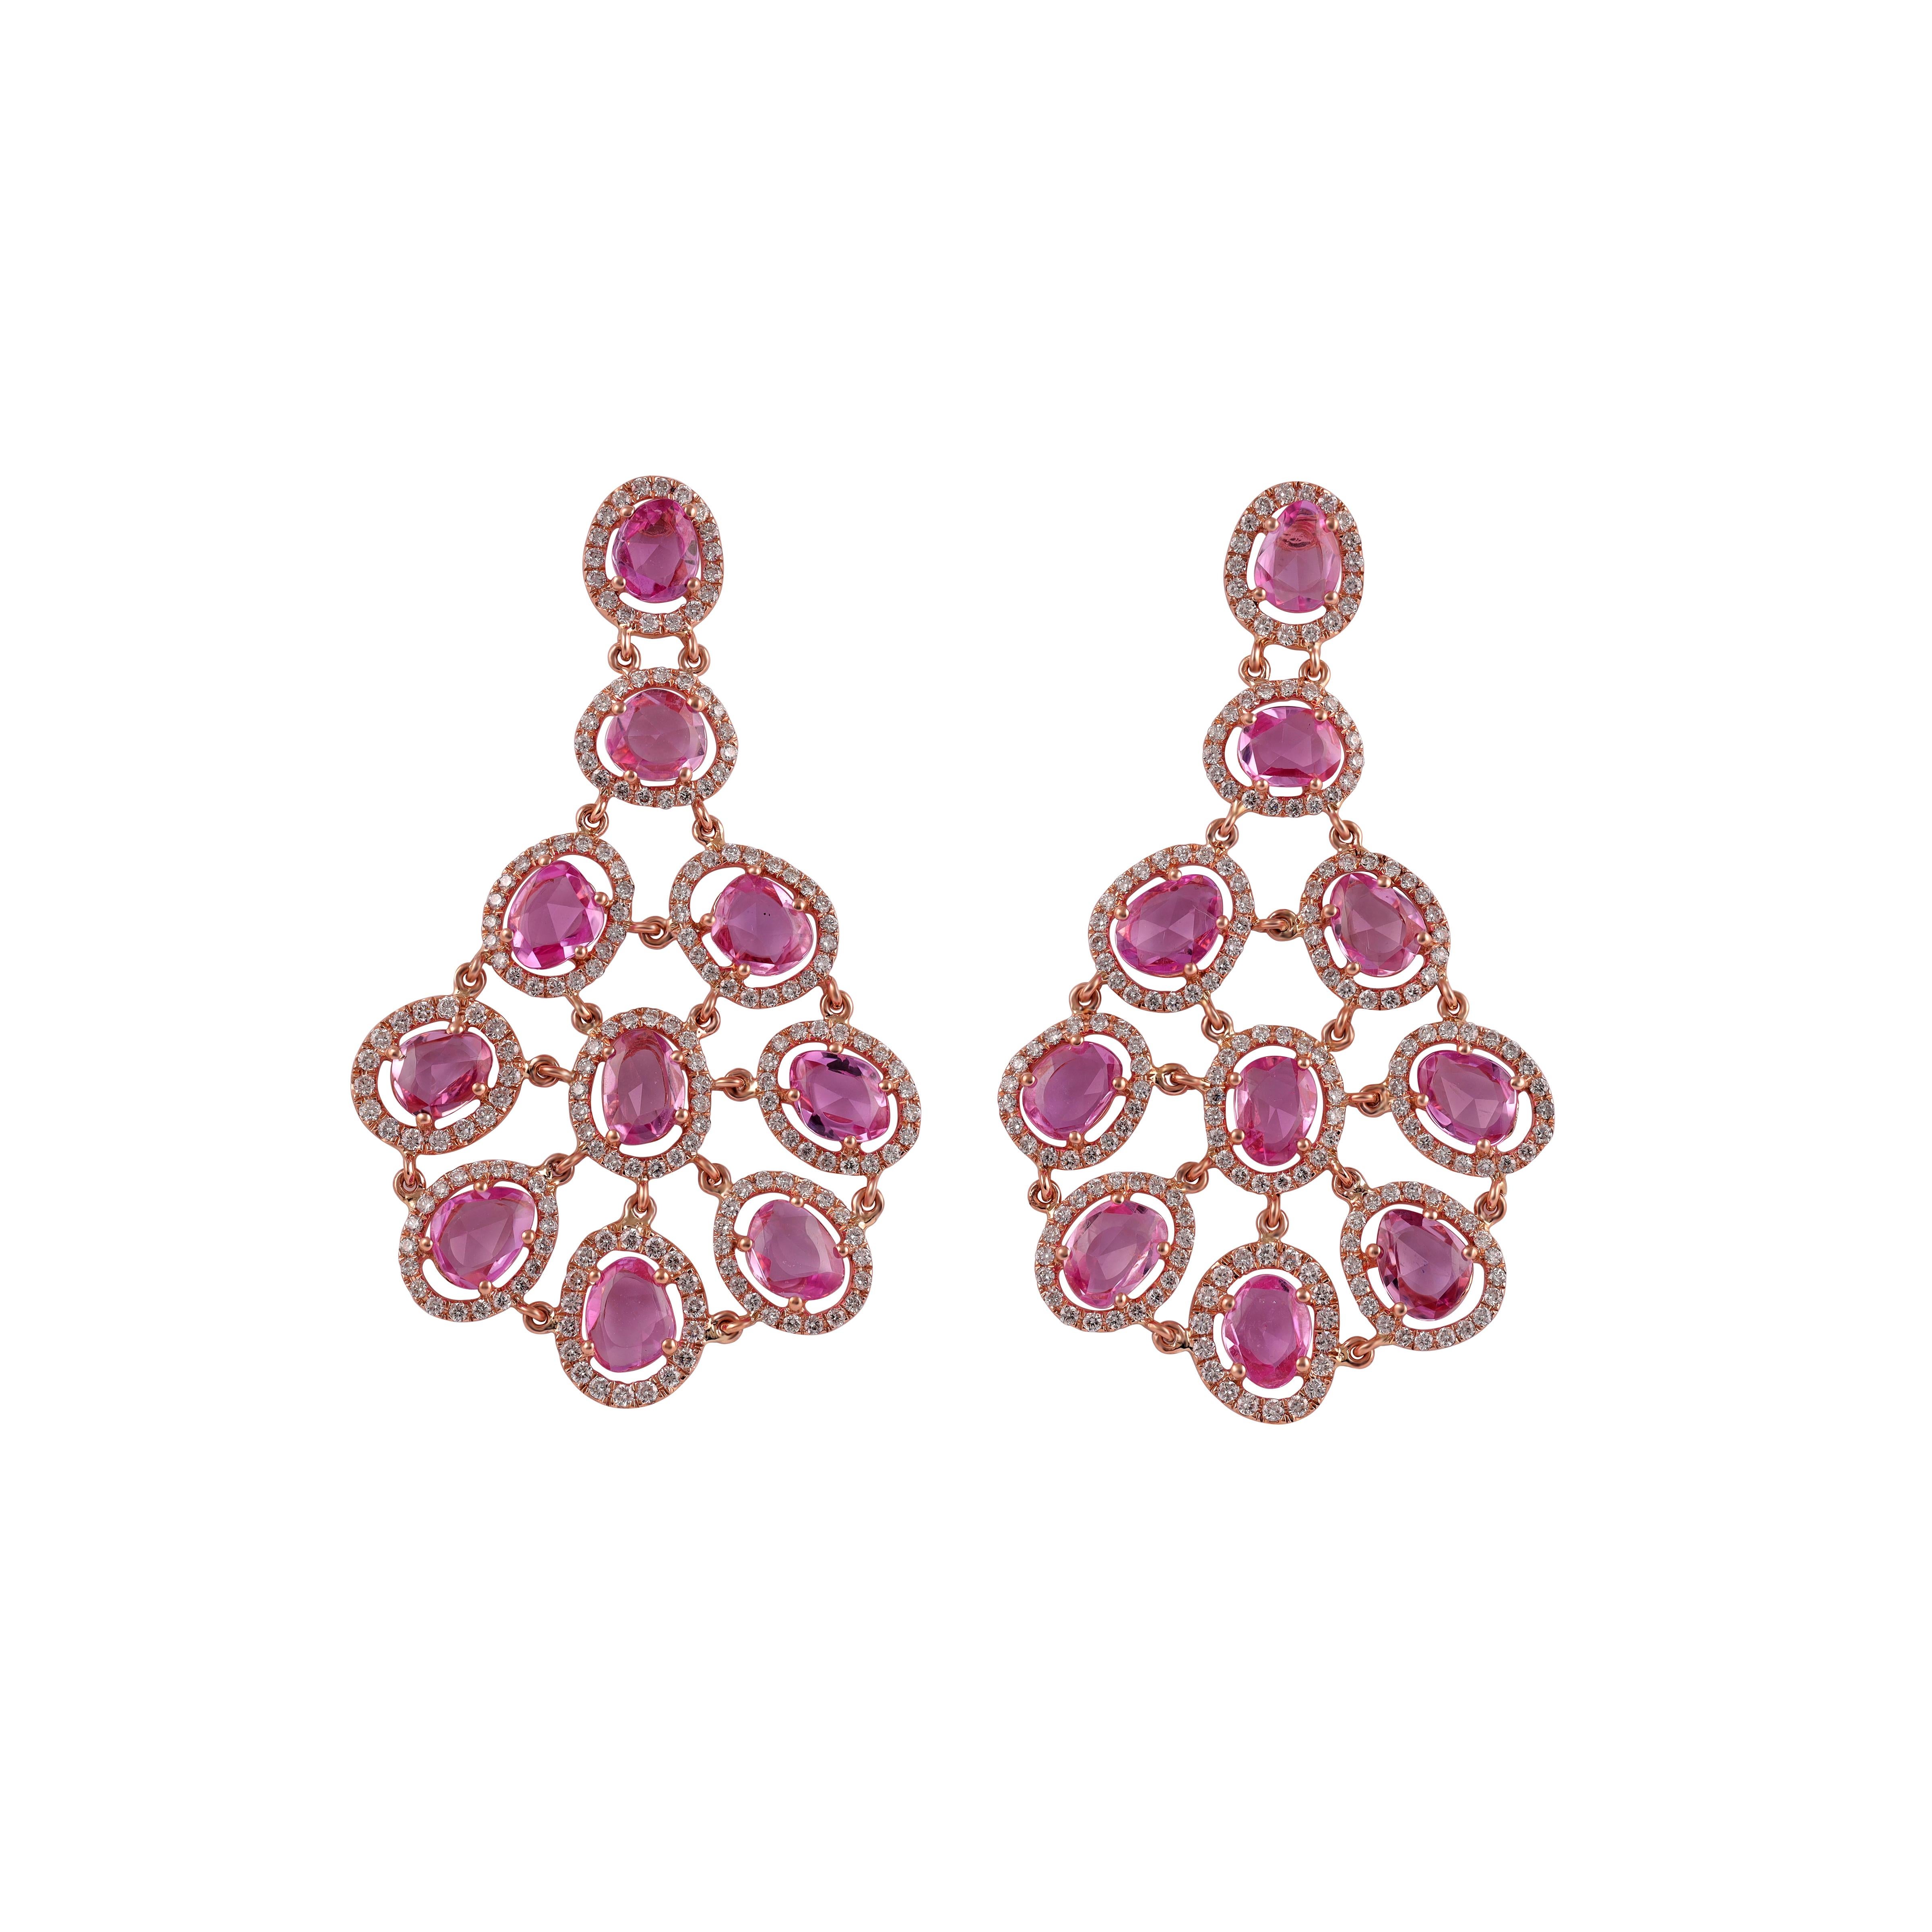 Magnificent Pink Sapphire & Diamonds Long Earrings 
Pink Sapphire approx. 10.68 CTS
389 Round brilliant cut diamonds 2.20 CTS
Gold 18k-10.34gm

Custom Services
Request Customization